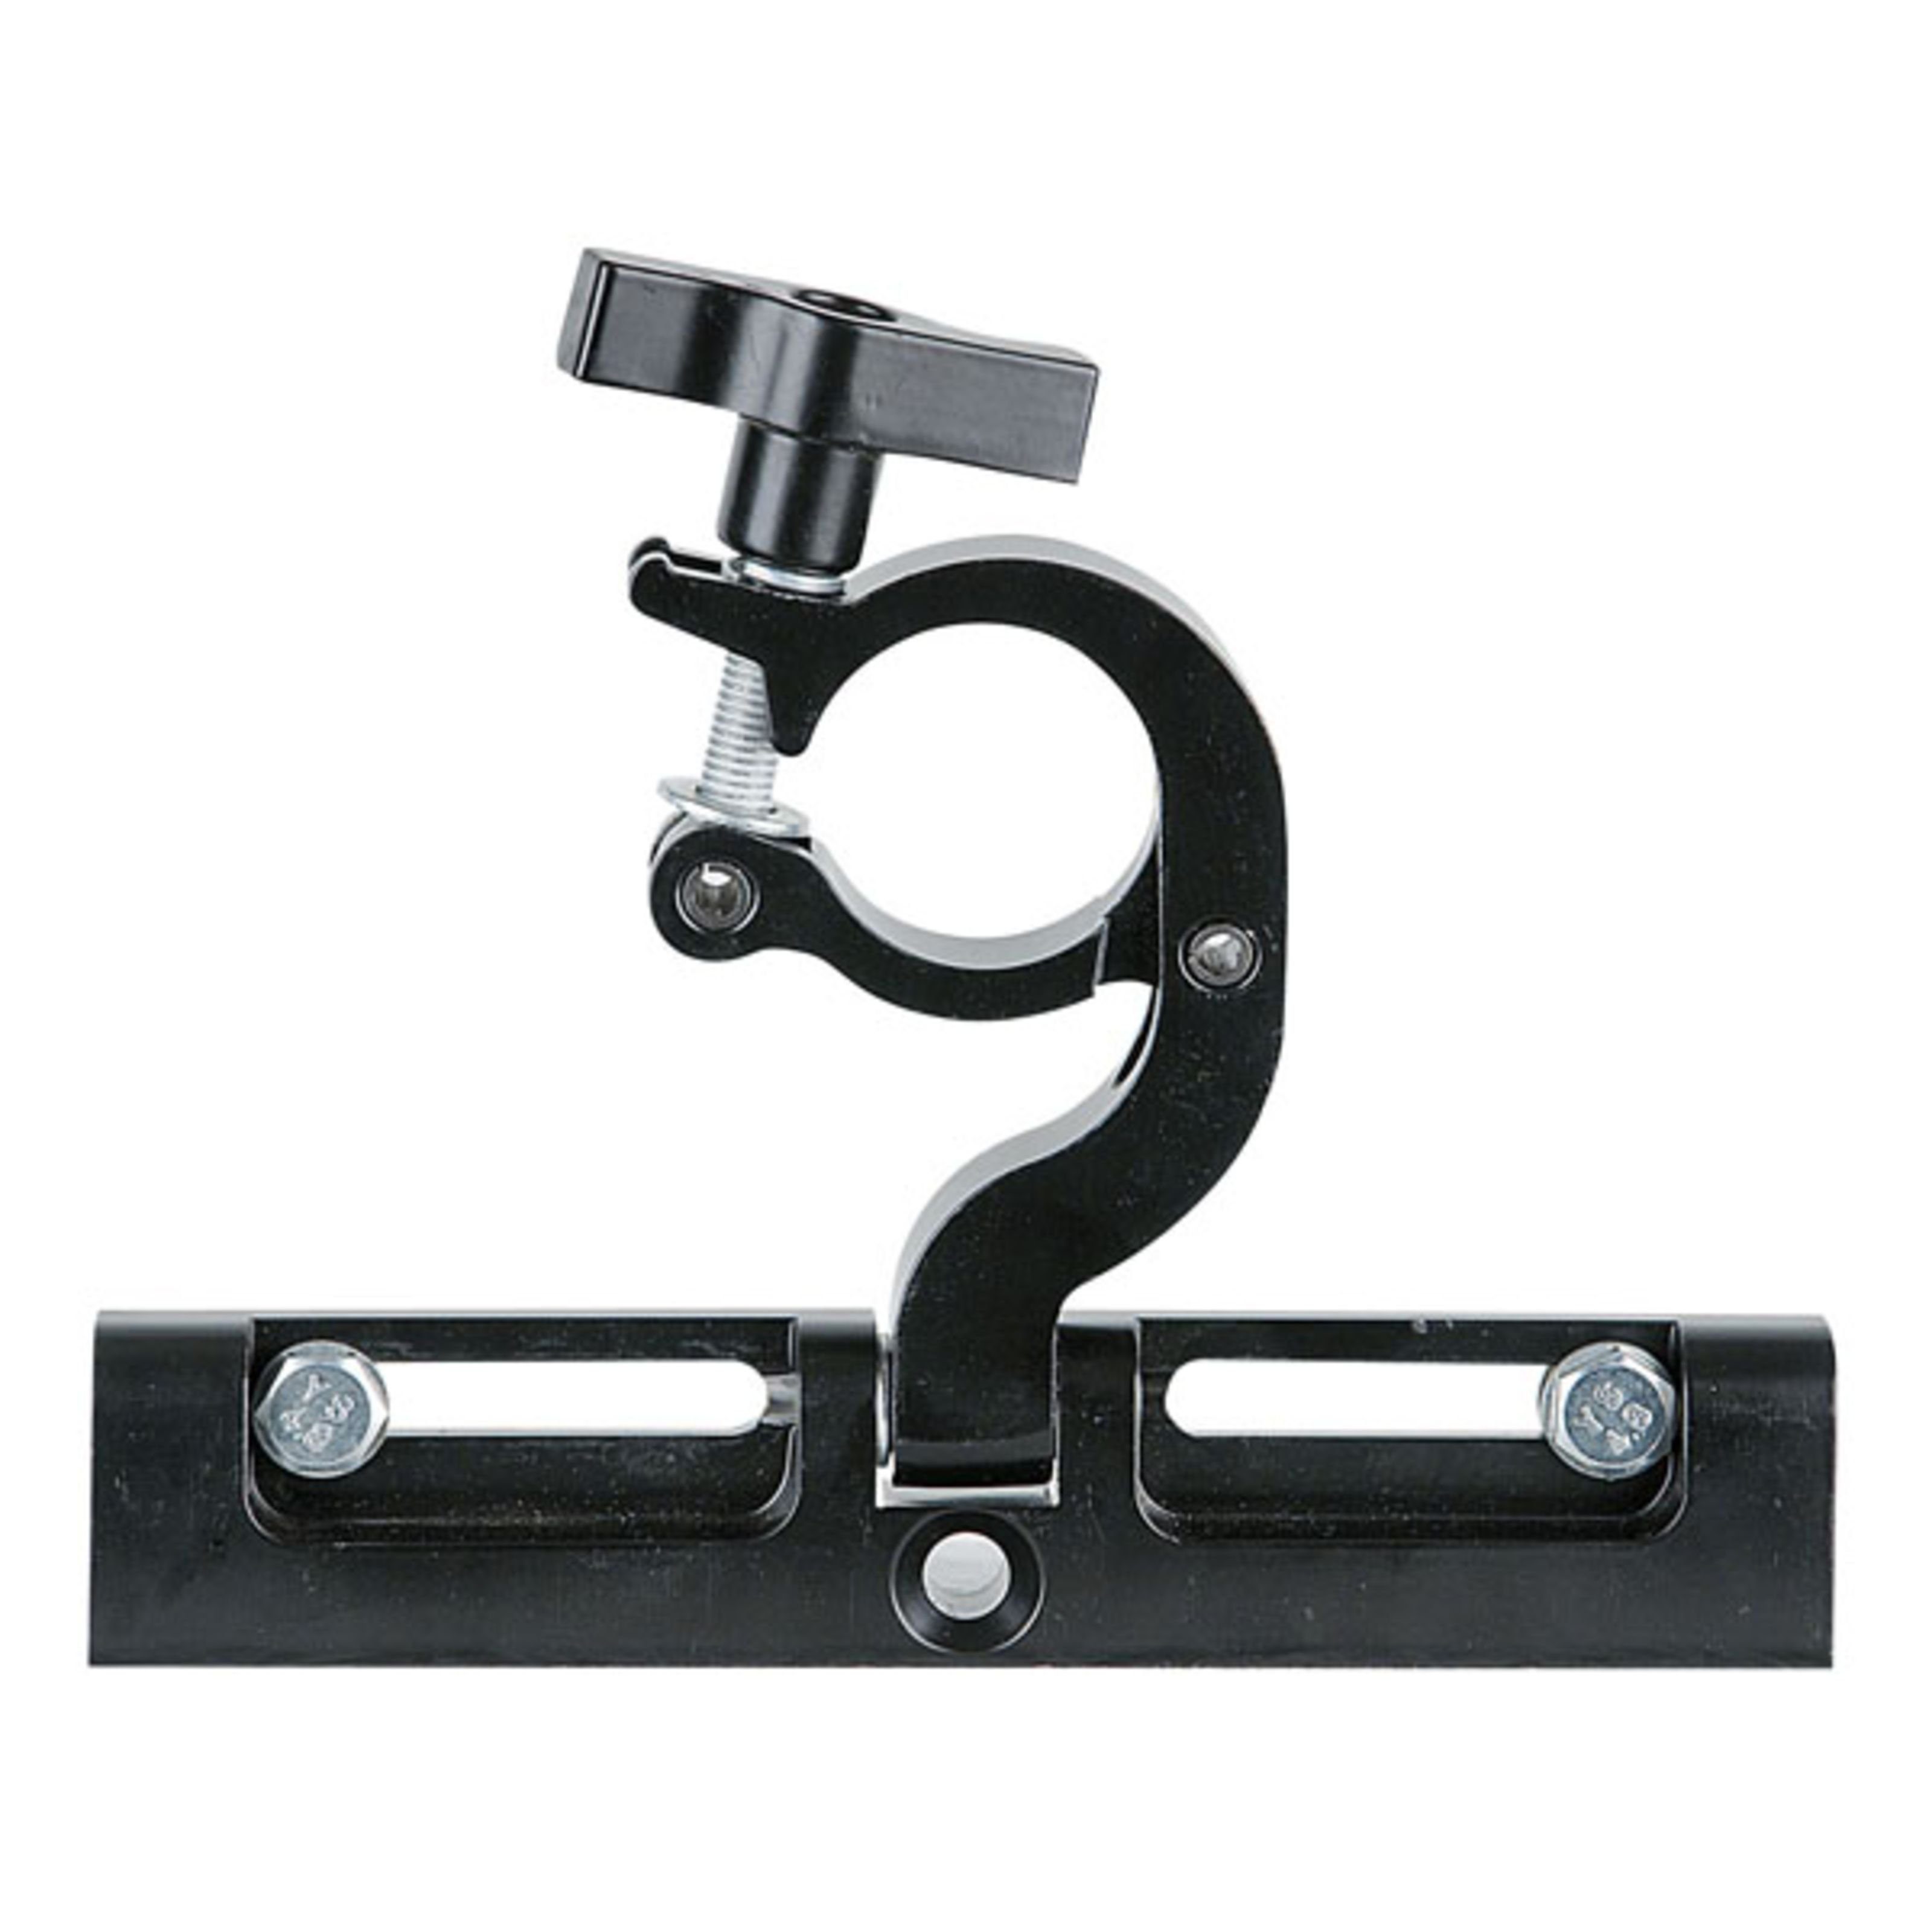 Show tec LED - Universal Moving 50 150Kg Discolicht, Head Heads Clamp Moving SWL: u mm, Zubehör